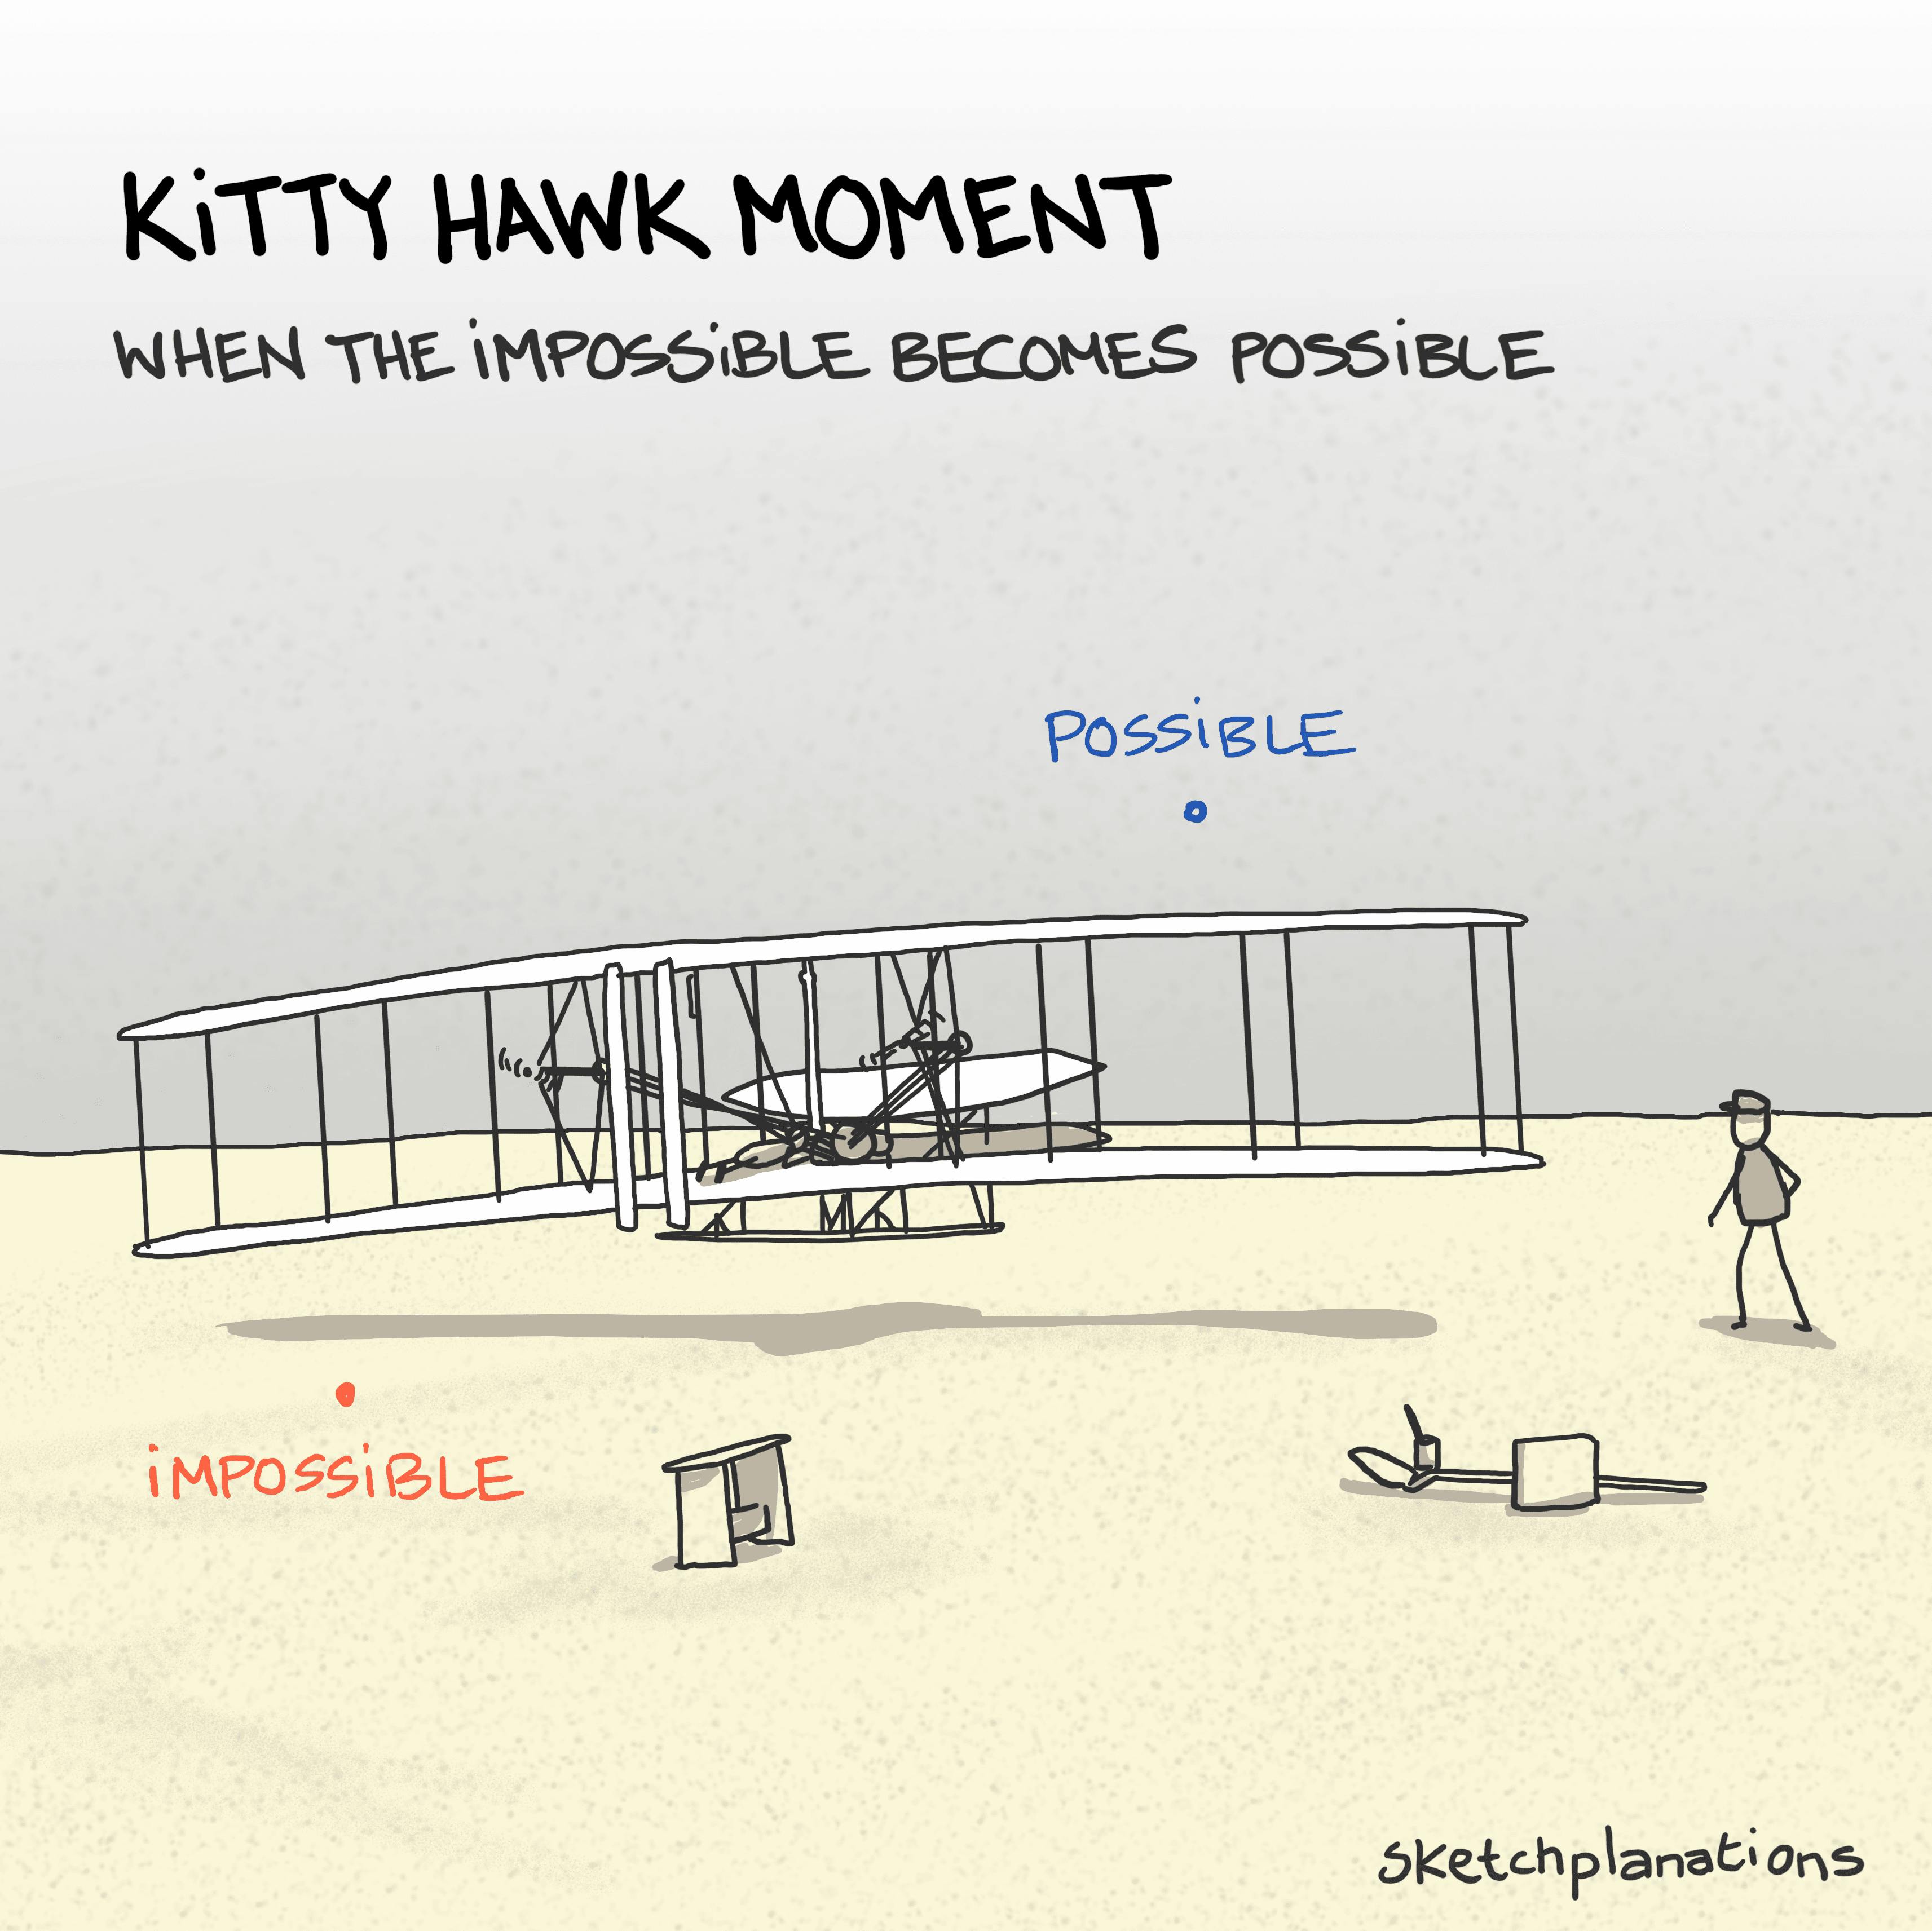 Kitty Hawk Moment illustration: The Wright brother's first successful bi-plane, The Wright Flyer is shown taking flight; shifting the concept of human flight from the impossible to the possible. 